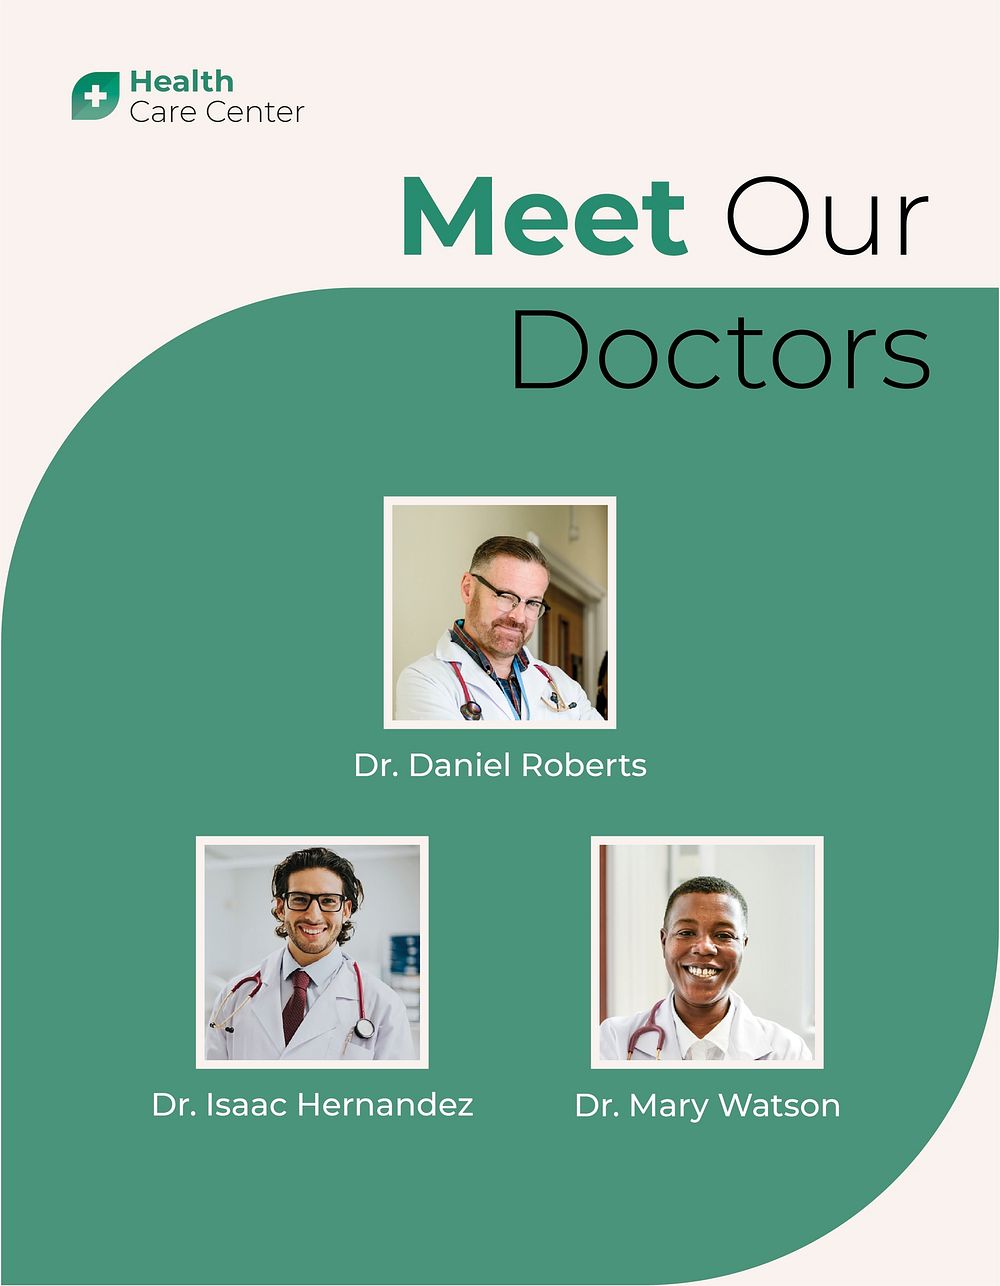 Meet our doctors flyer template, medical business psd